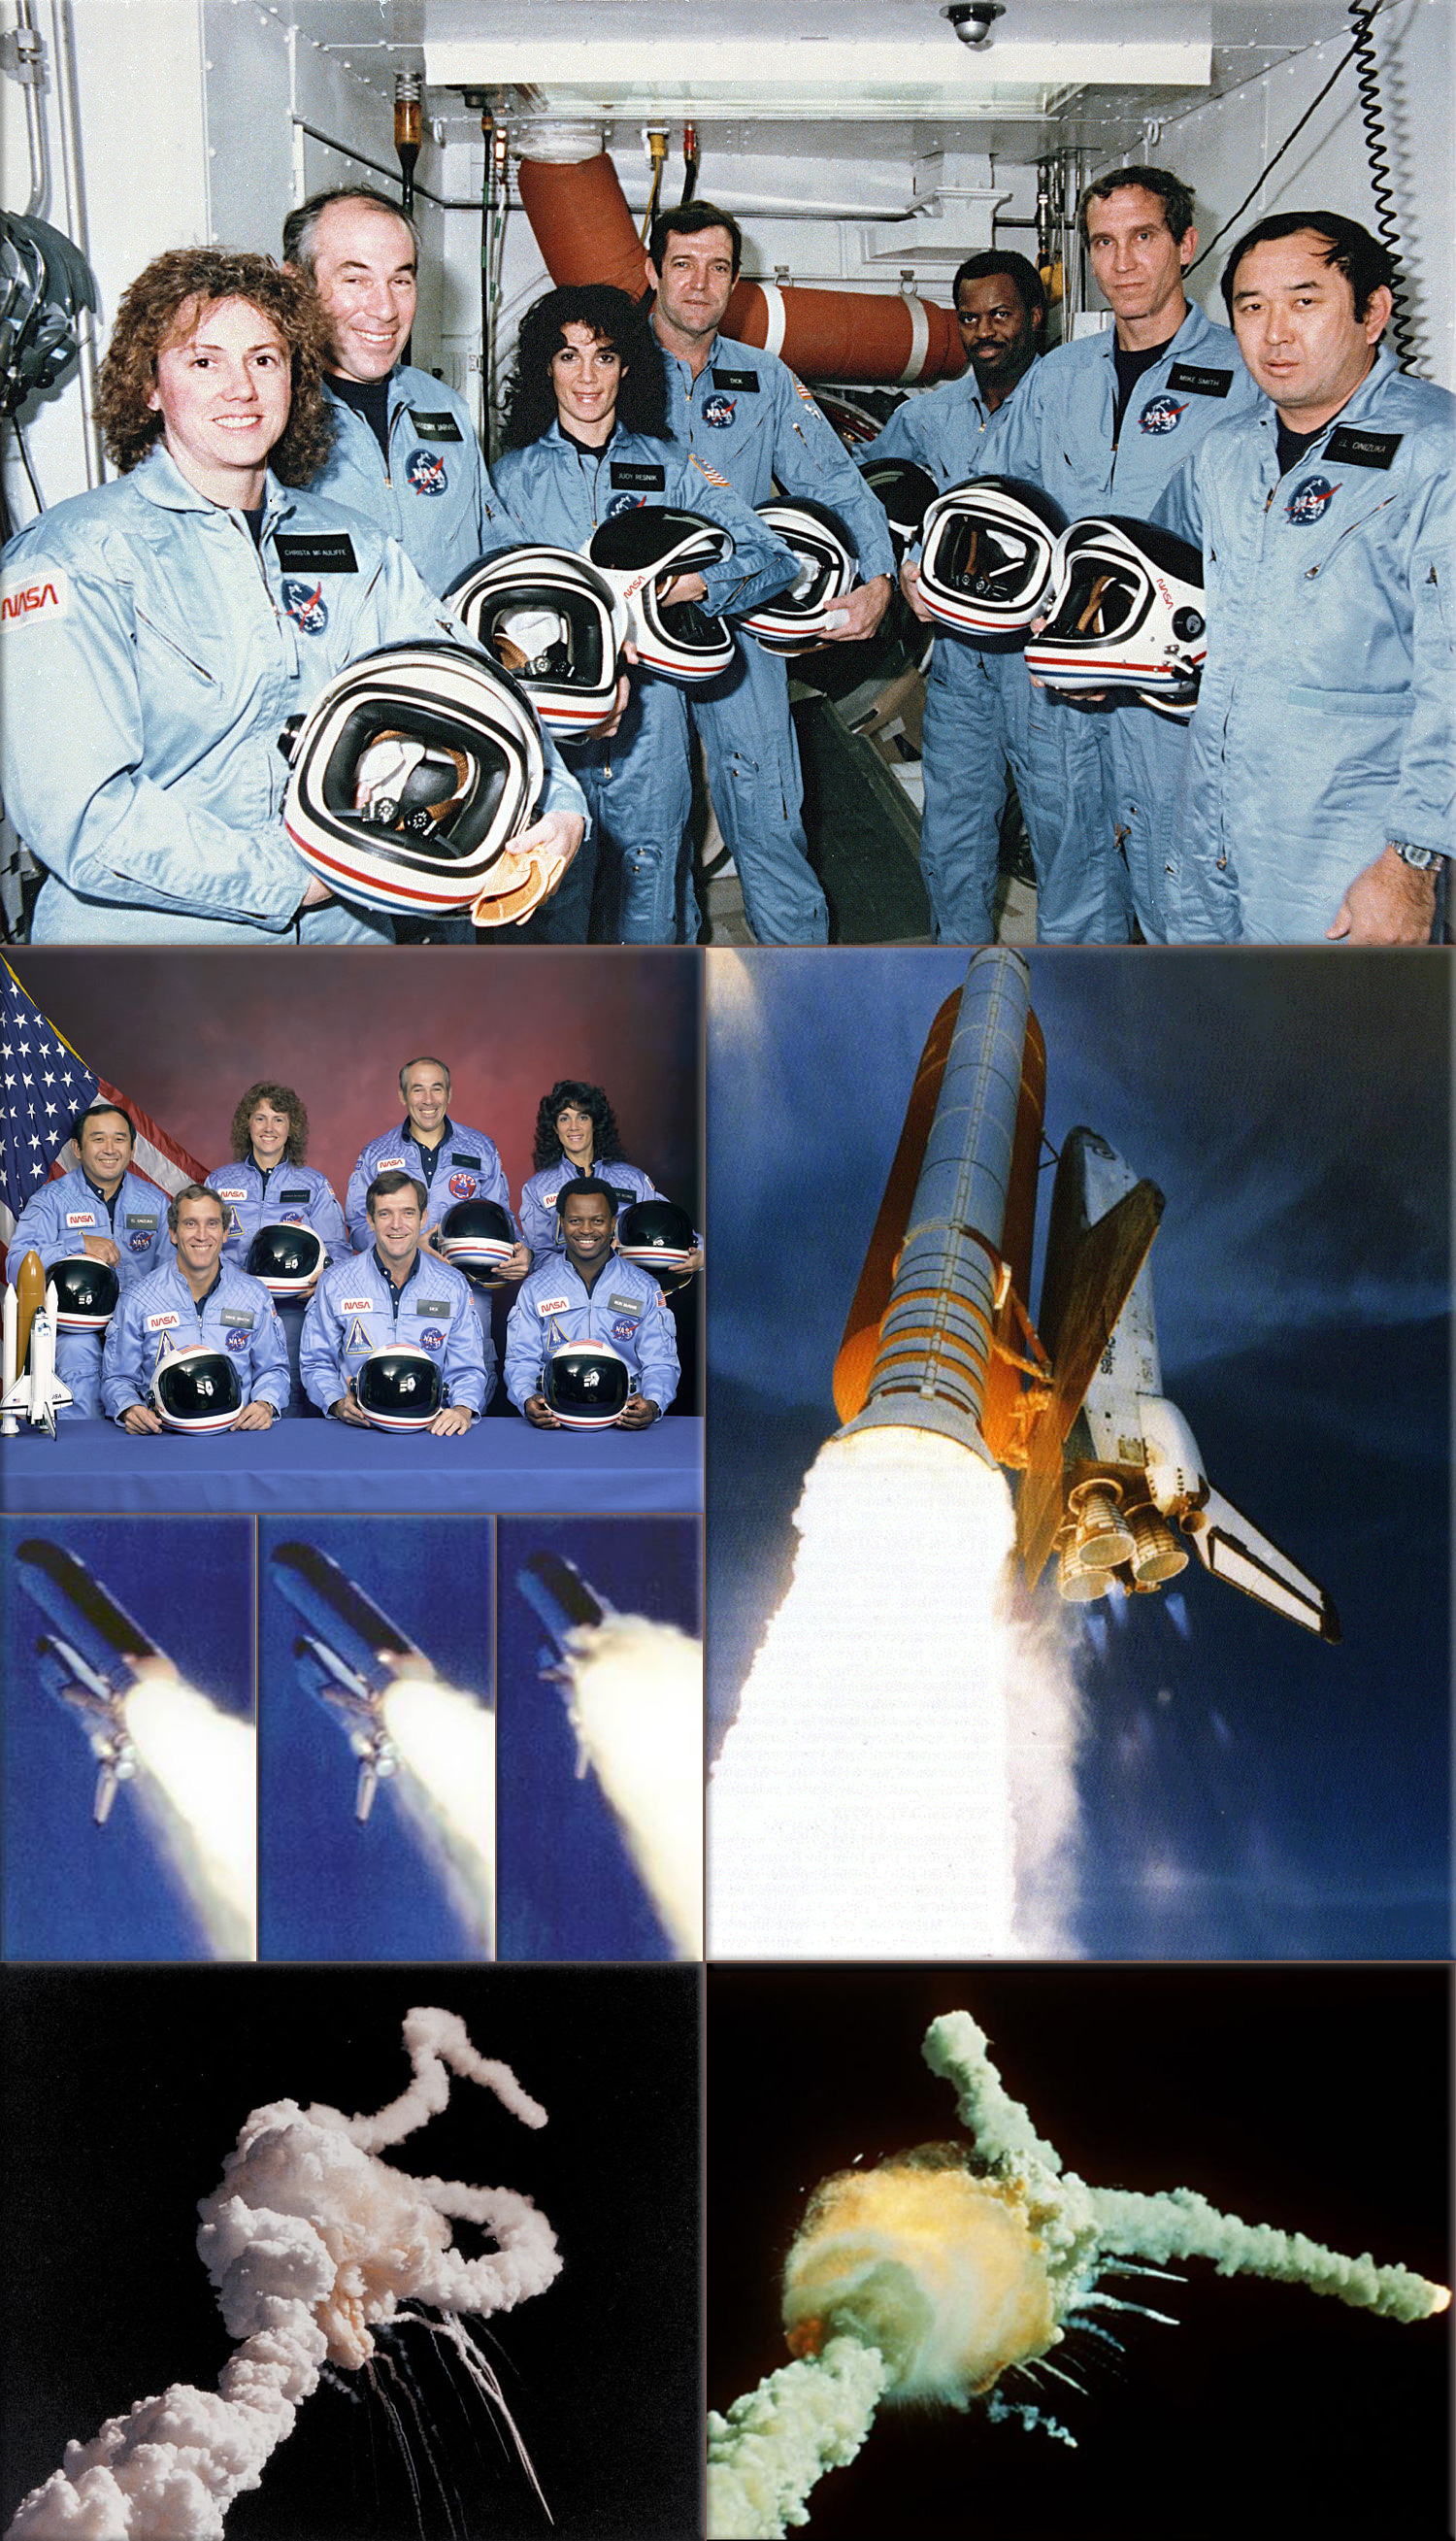 Space Shuttle Challenger disaster (Crew: Back row (L-R); Ellison Onizuka, Christa McAuliffe, Gregory Jarvis, Judith Resnik. Front row (L-R); Michael J. Smith, Francis 'Dick' Scobee, Ronald McNair)